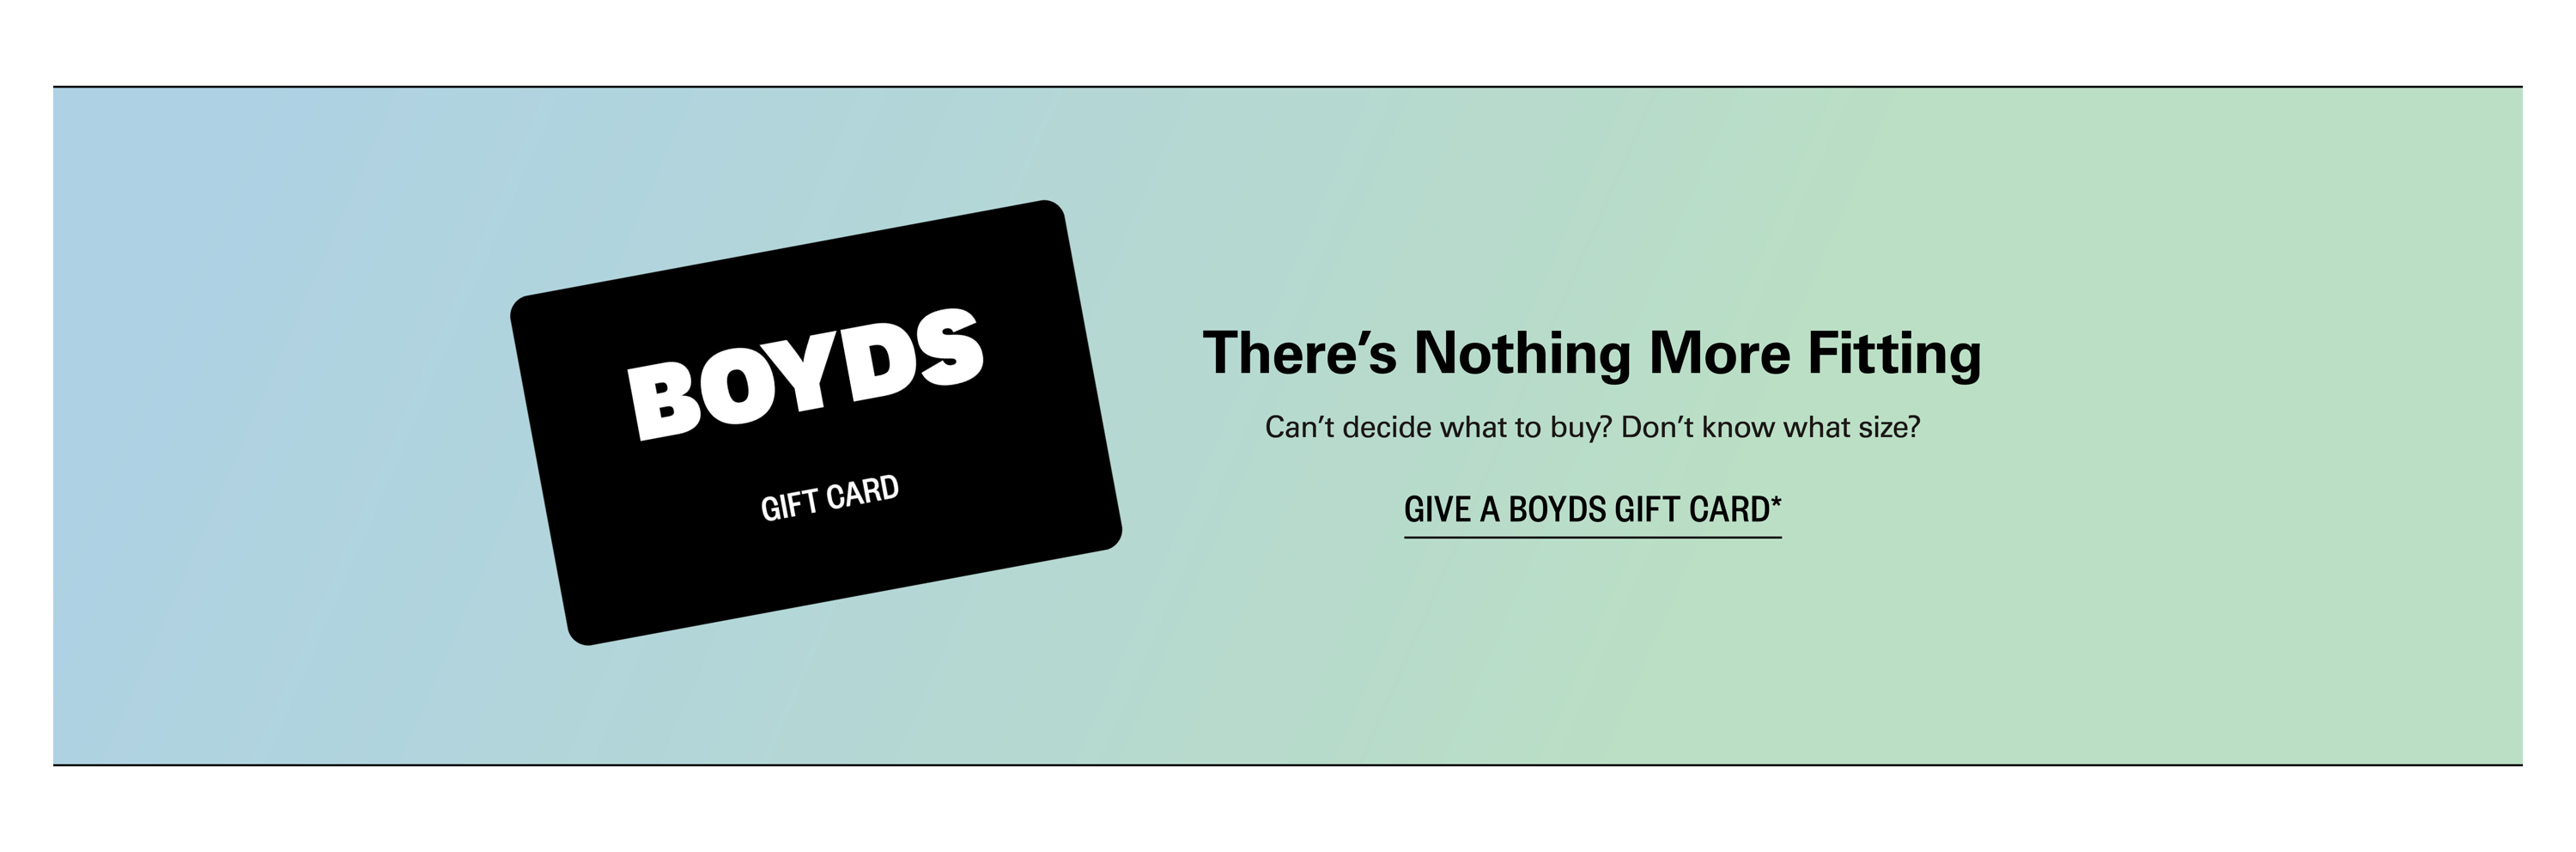 Boyds Gift Card - There's Nothing More Fiting